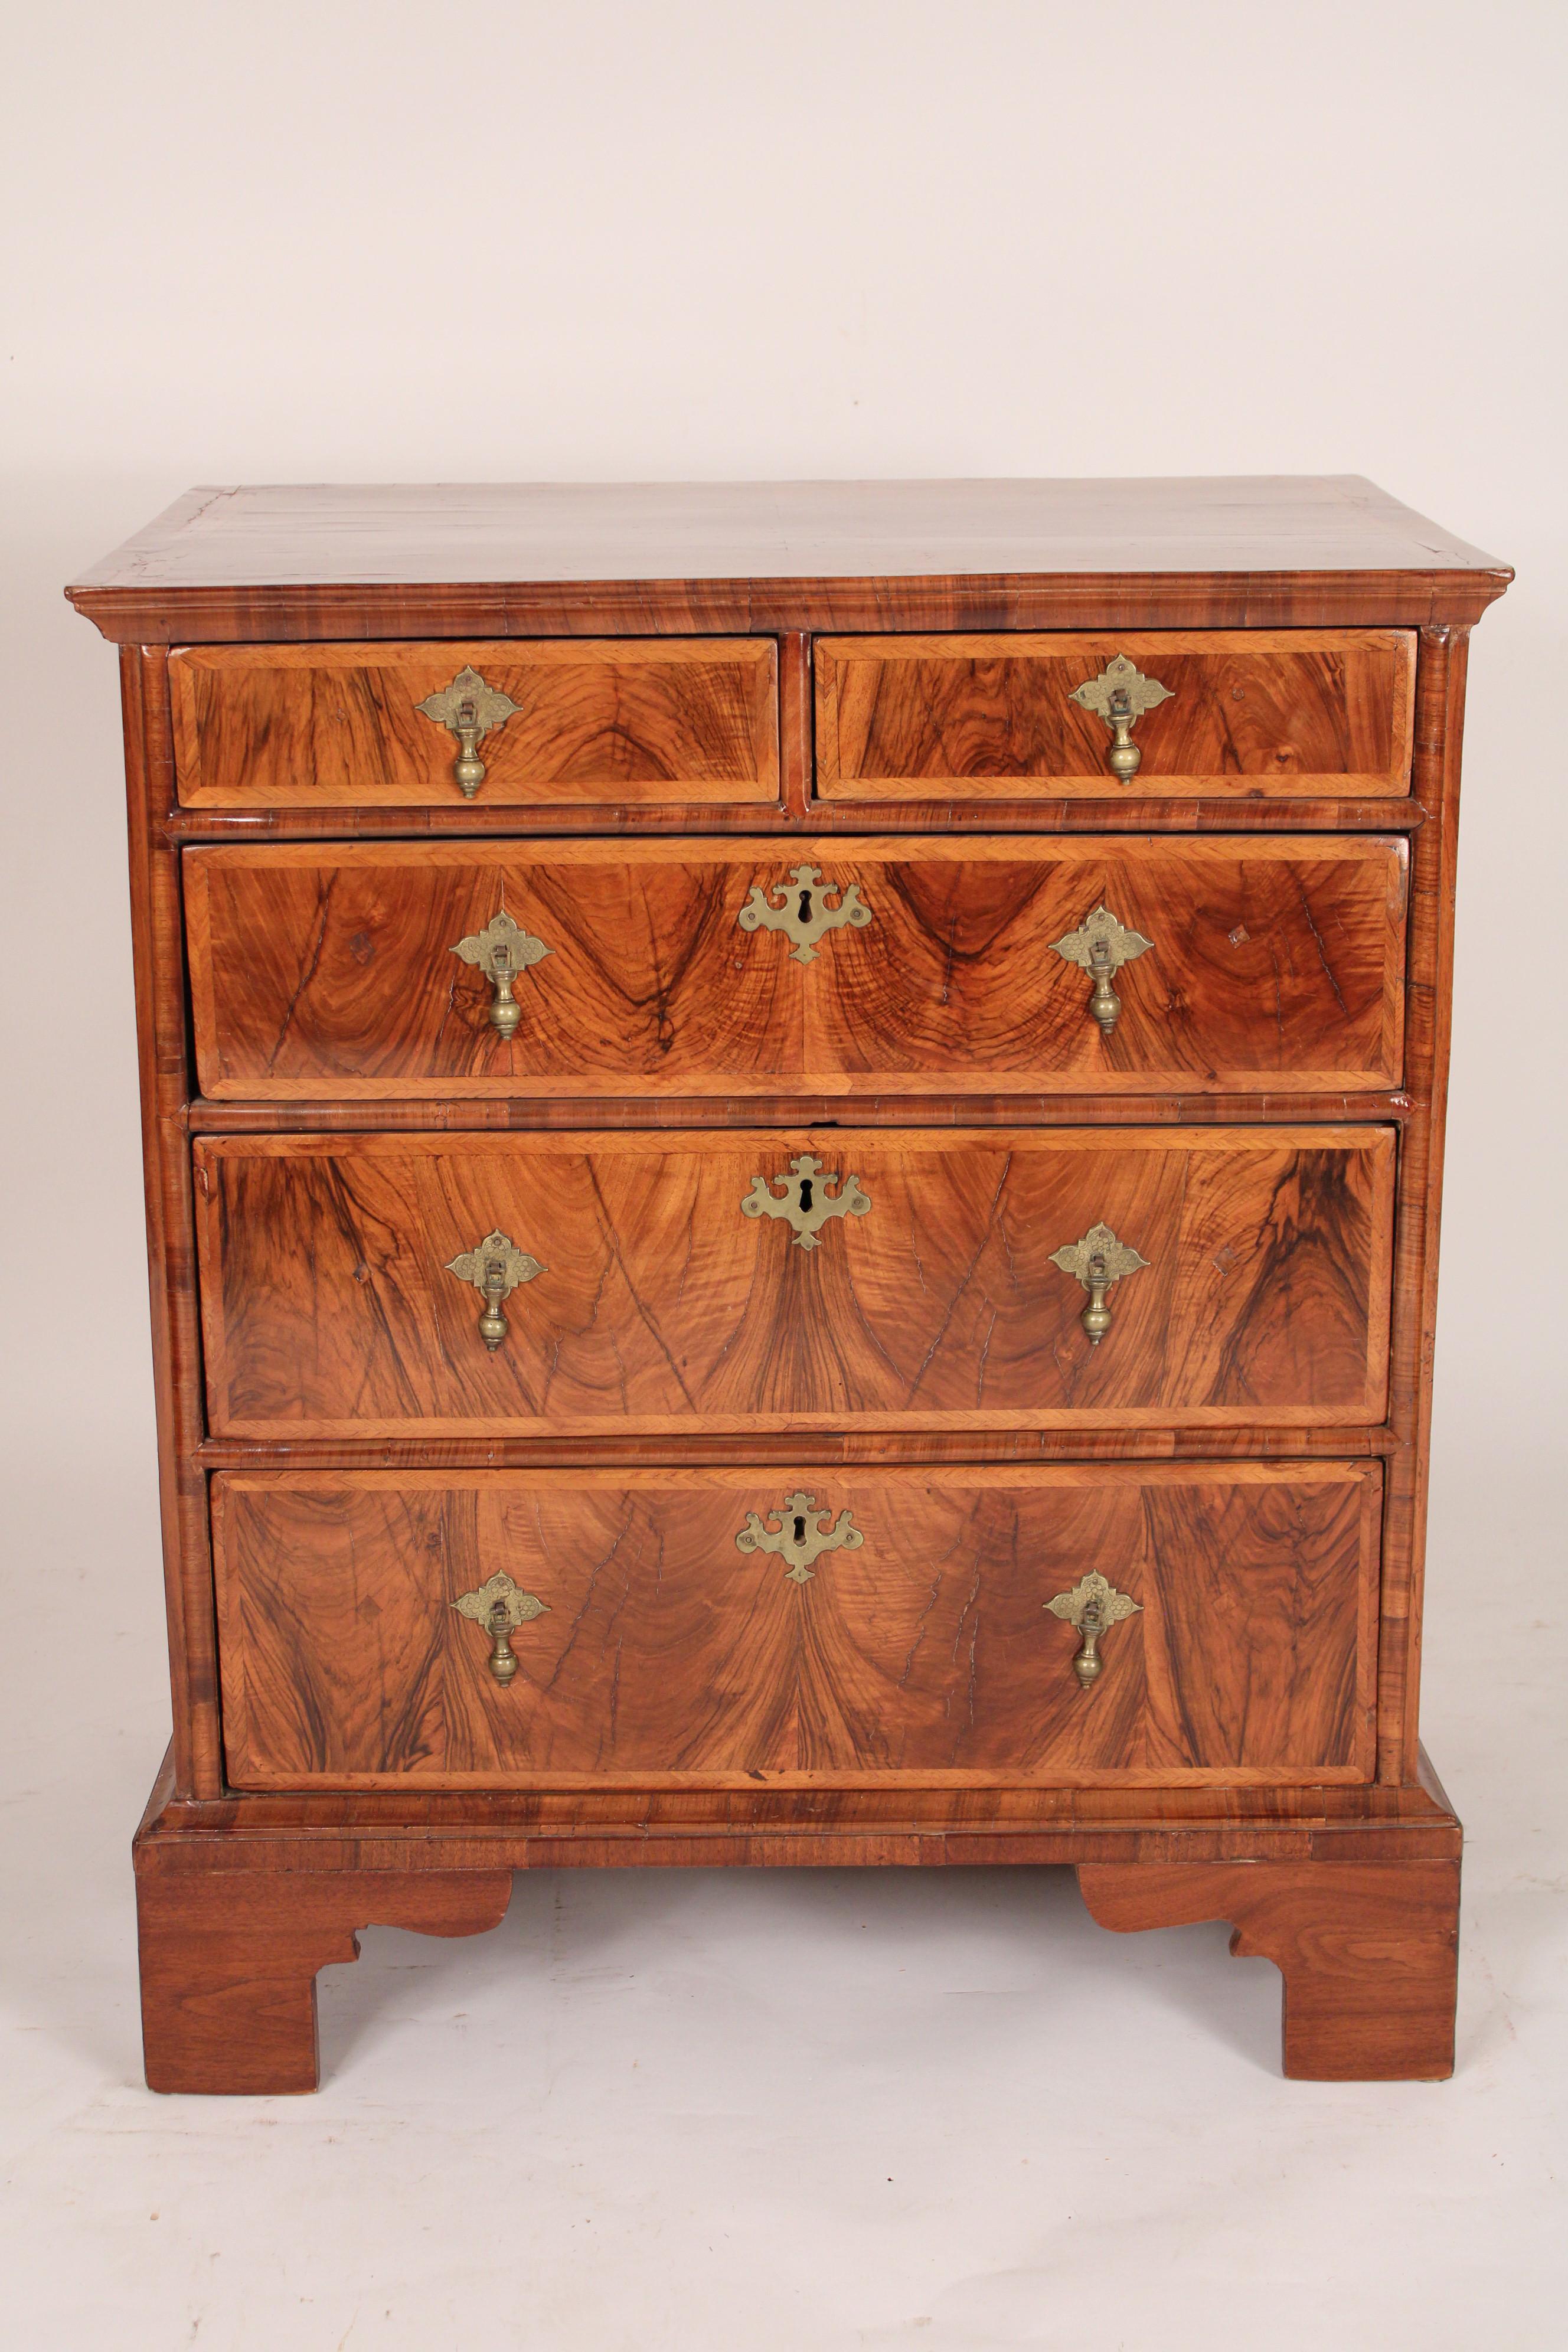 Antique Queen Anne style burl walnut chest of drawers, 20th century. With a burl walnut top with herringbone inlay, a split top drawer and 3 graduated drawers all with burl walnut and herringbone inlaid borders and brass tear drop drawer pulls,